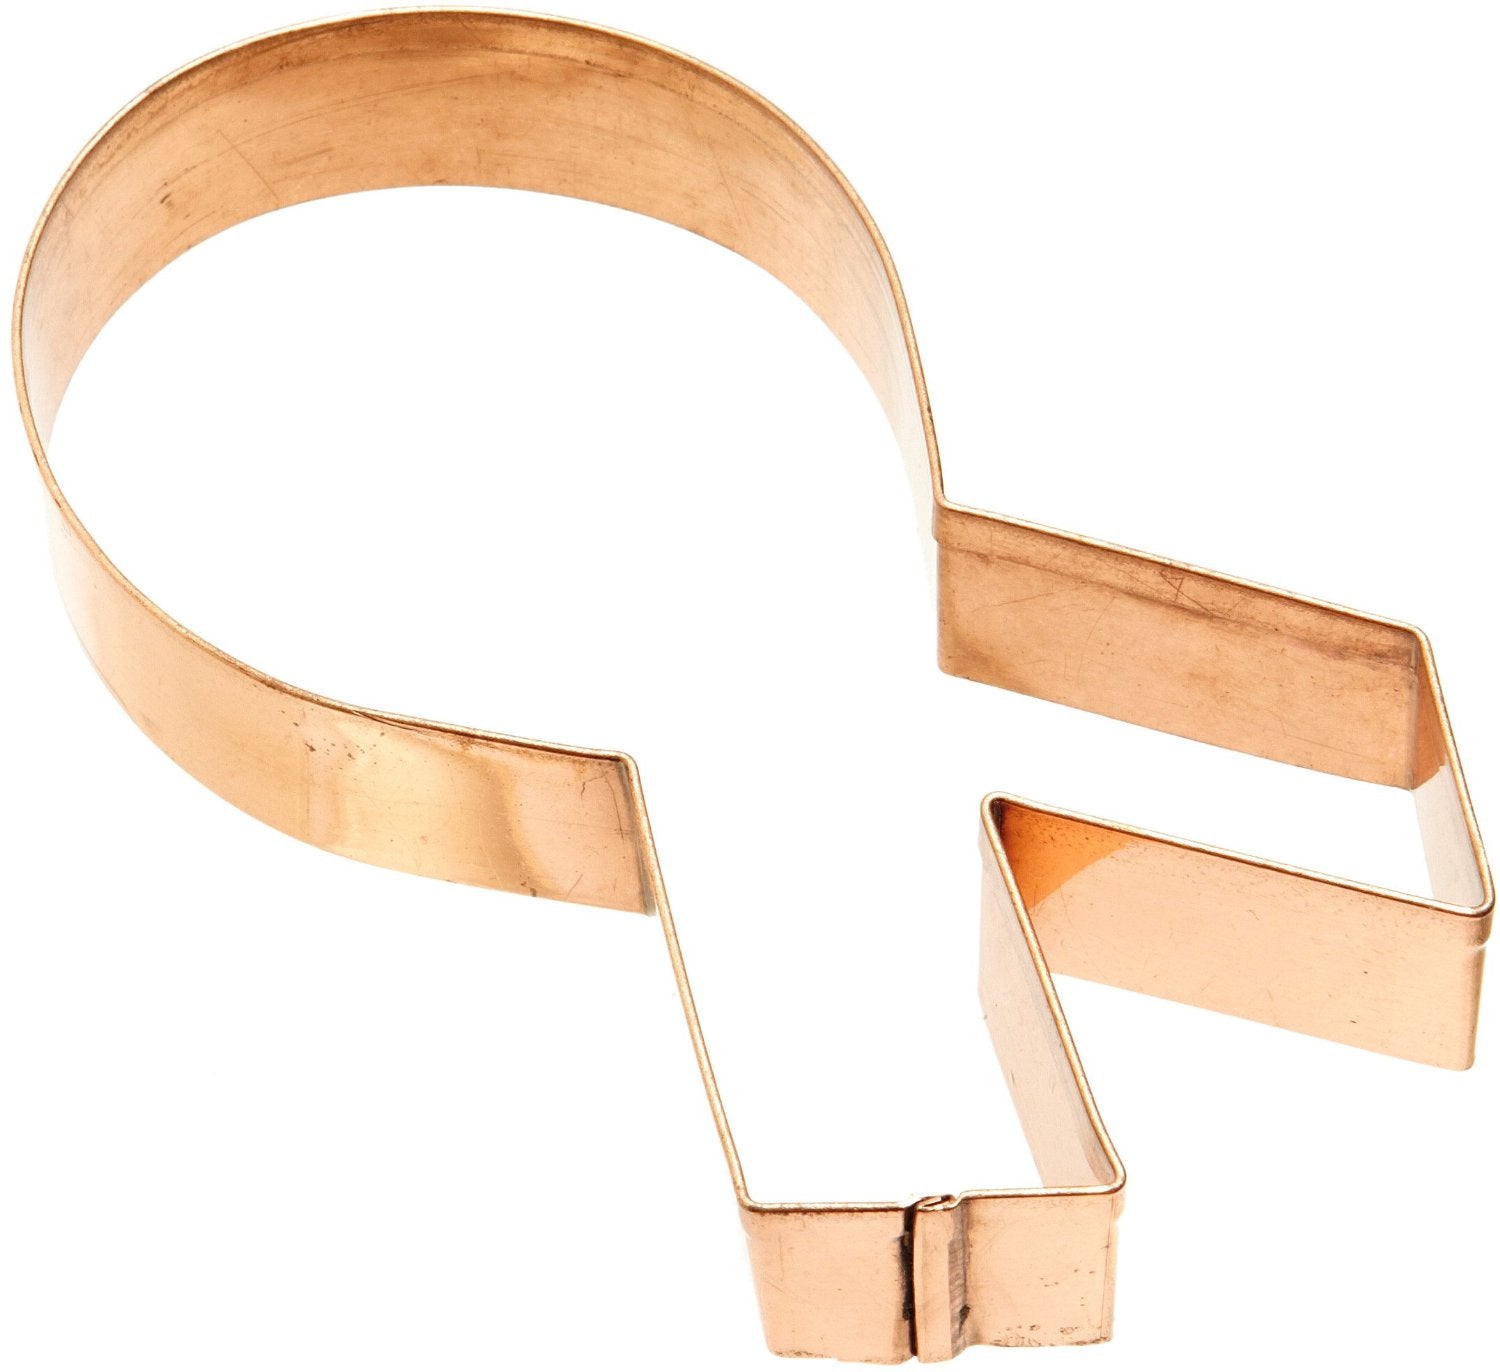 Aware Ribbon Cookie Cutter